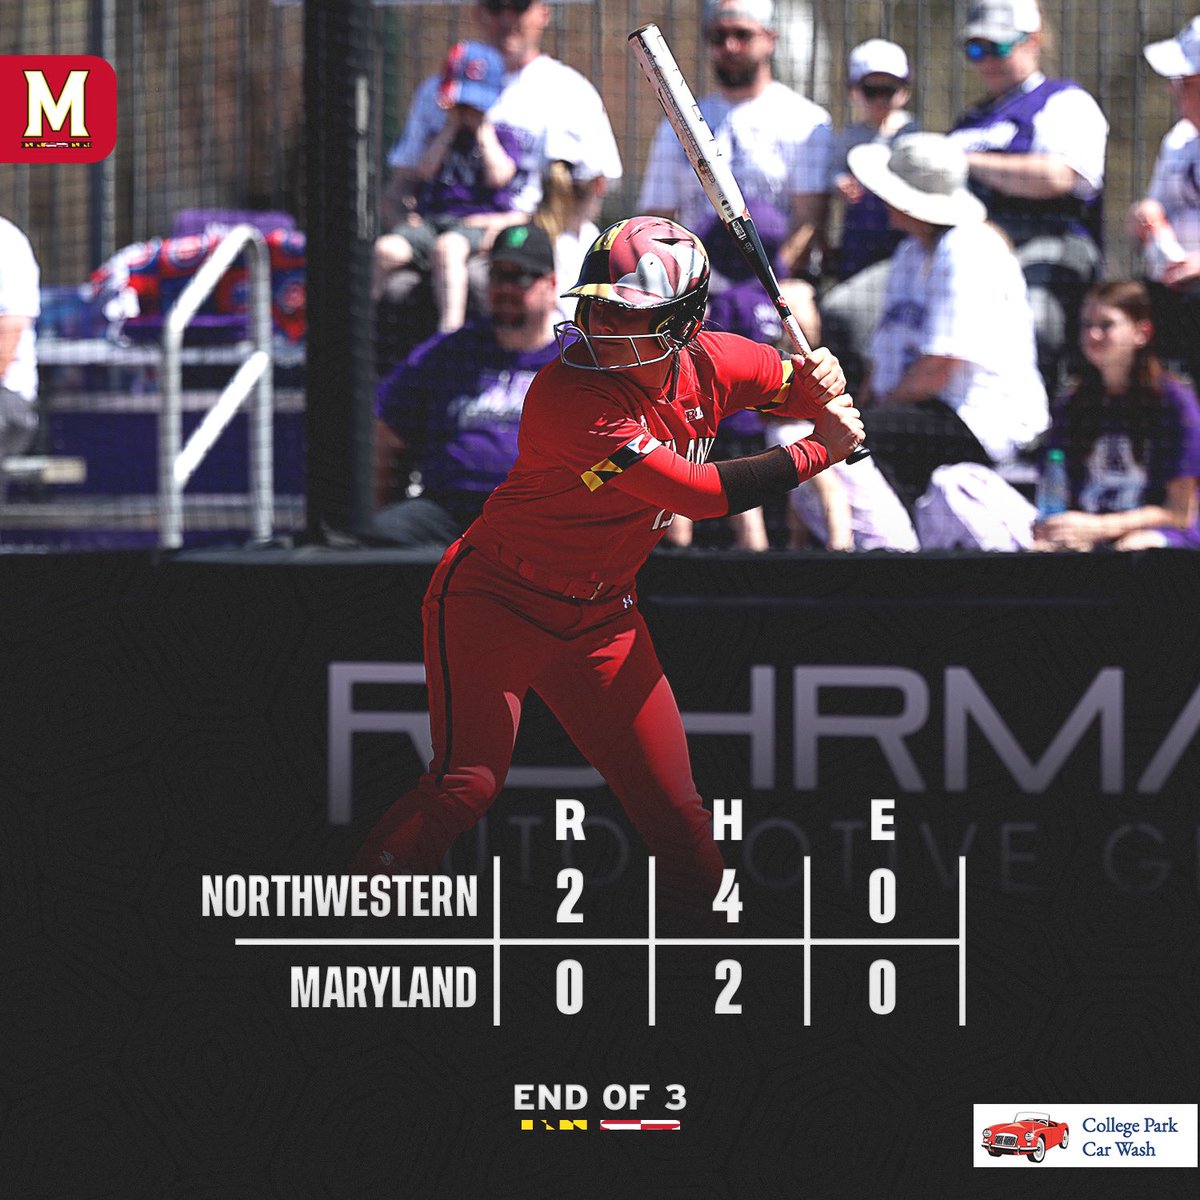 Terps down after three. 

#FearTheTurtle